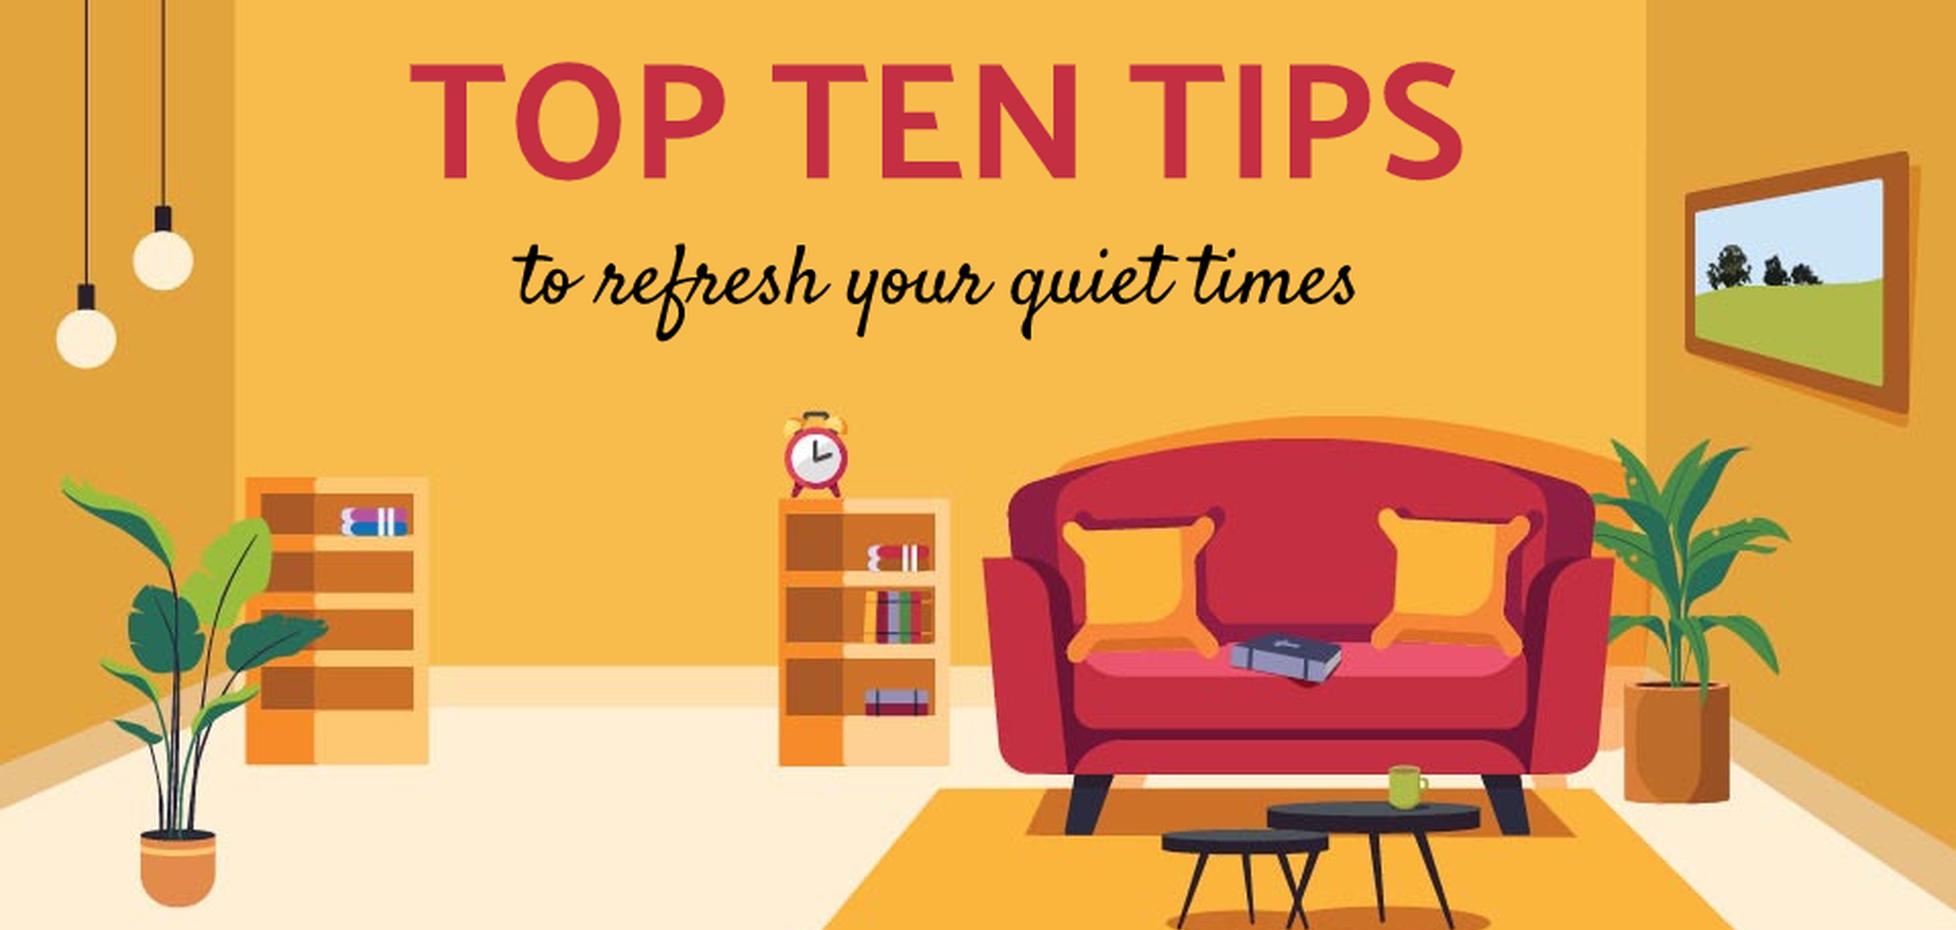 Top 10 Tips to Refresh your Quiet Times